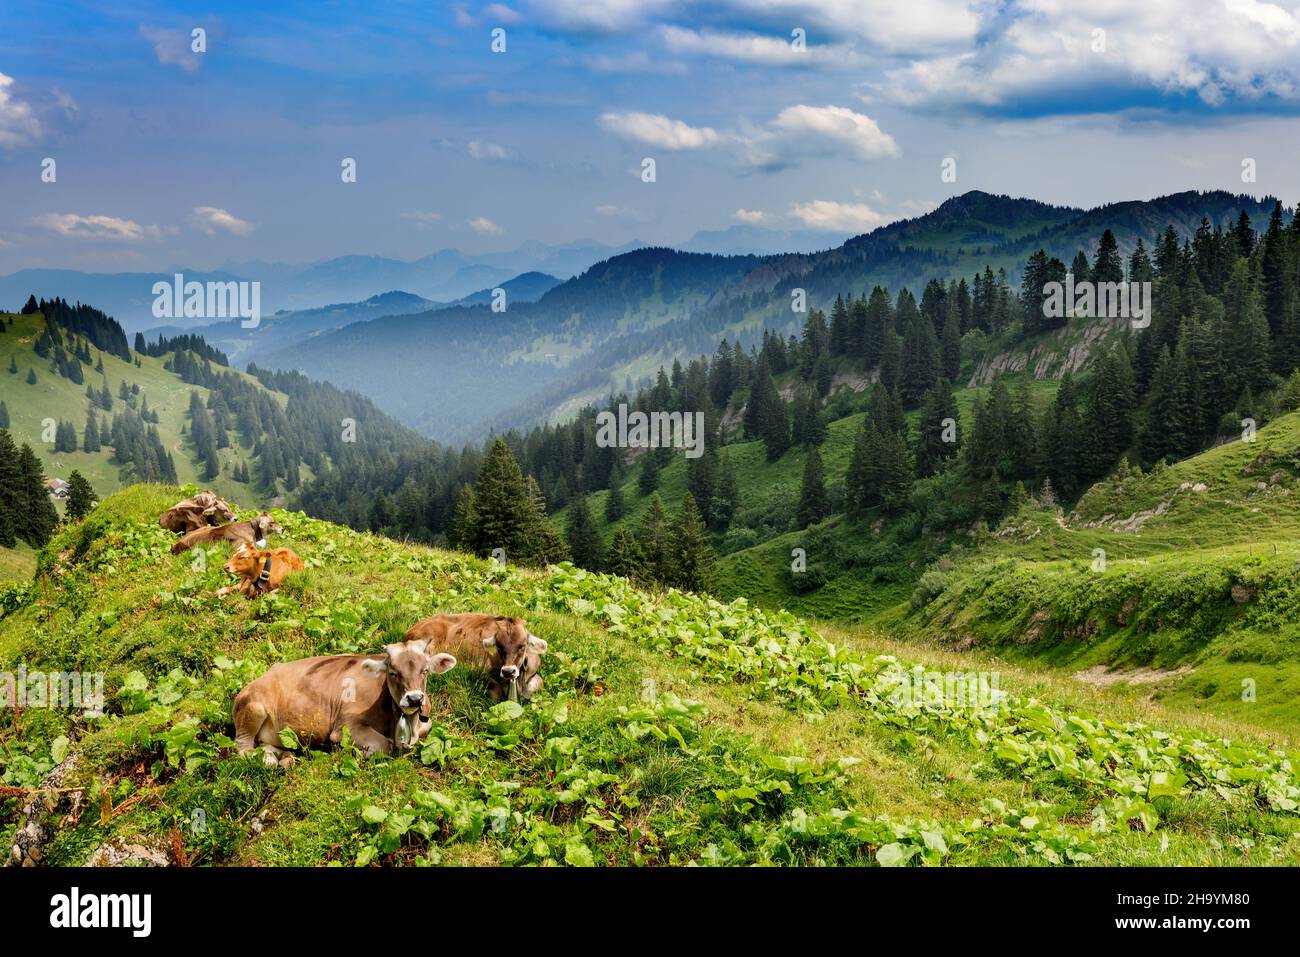 Cows resting on an alp at the Hochgrat, a summit in the alps near Oberstaufen in Allgäu, Bavaria, Germany. Stock Photo